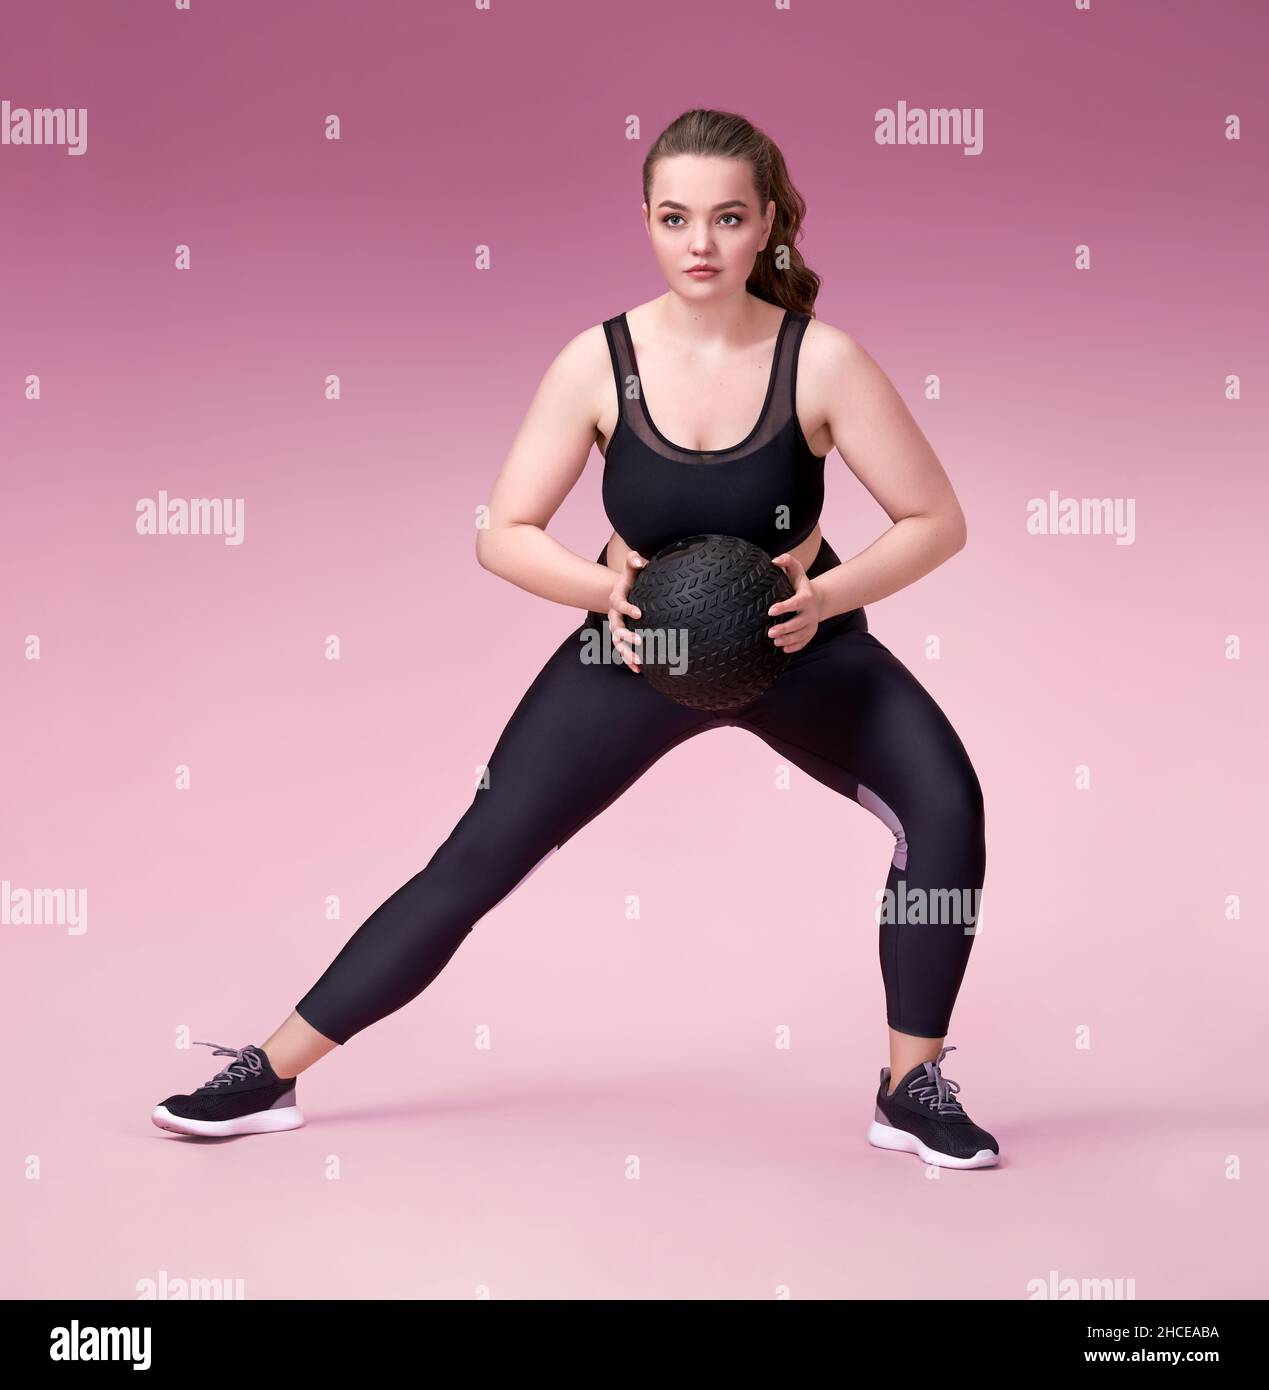 Sporty woman doing exercise with medicine ball. Photo of model with curvy figure in fashionable sportswear on pink background. Sports motivation and h Stock Photo